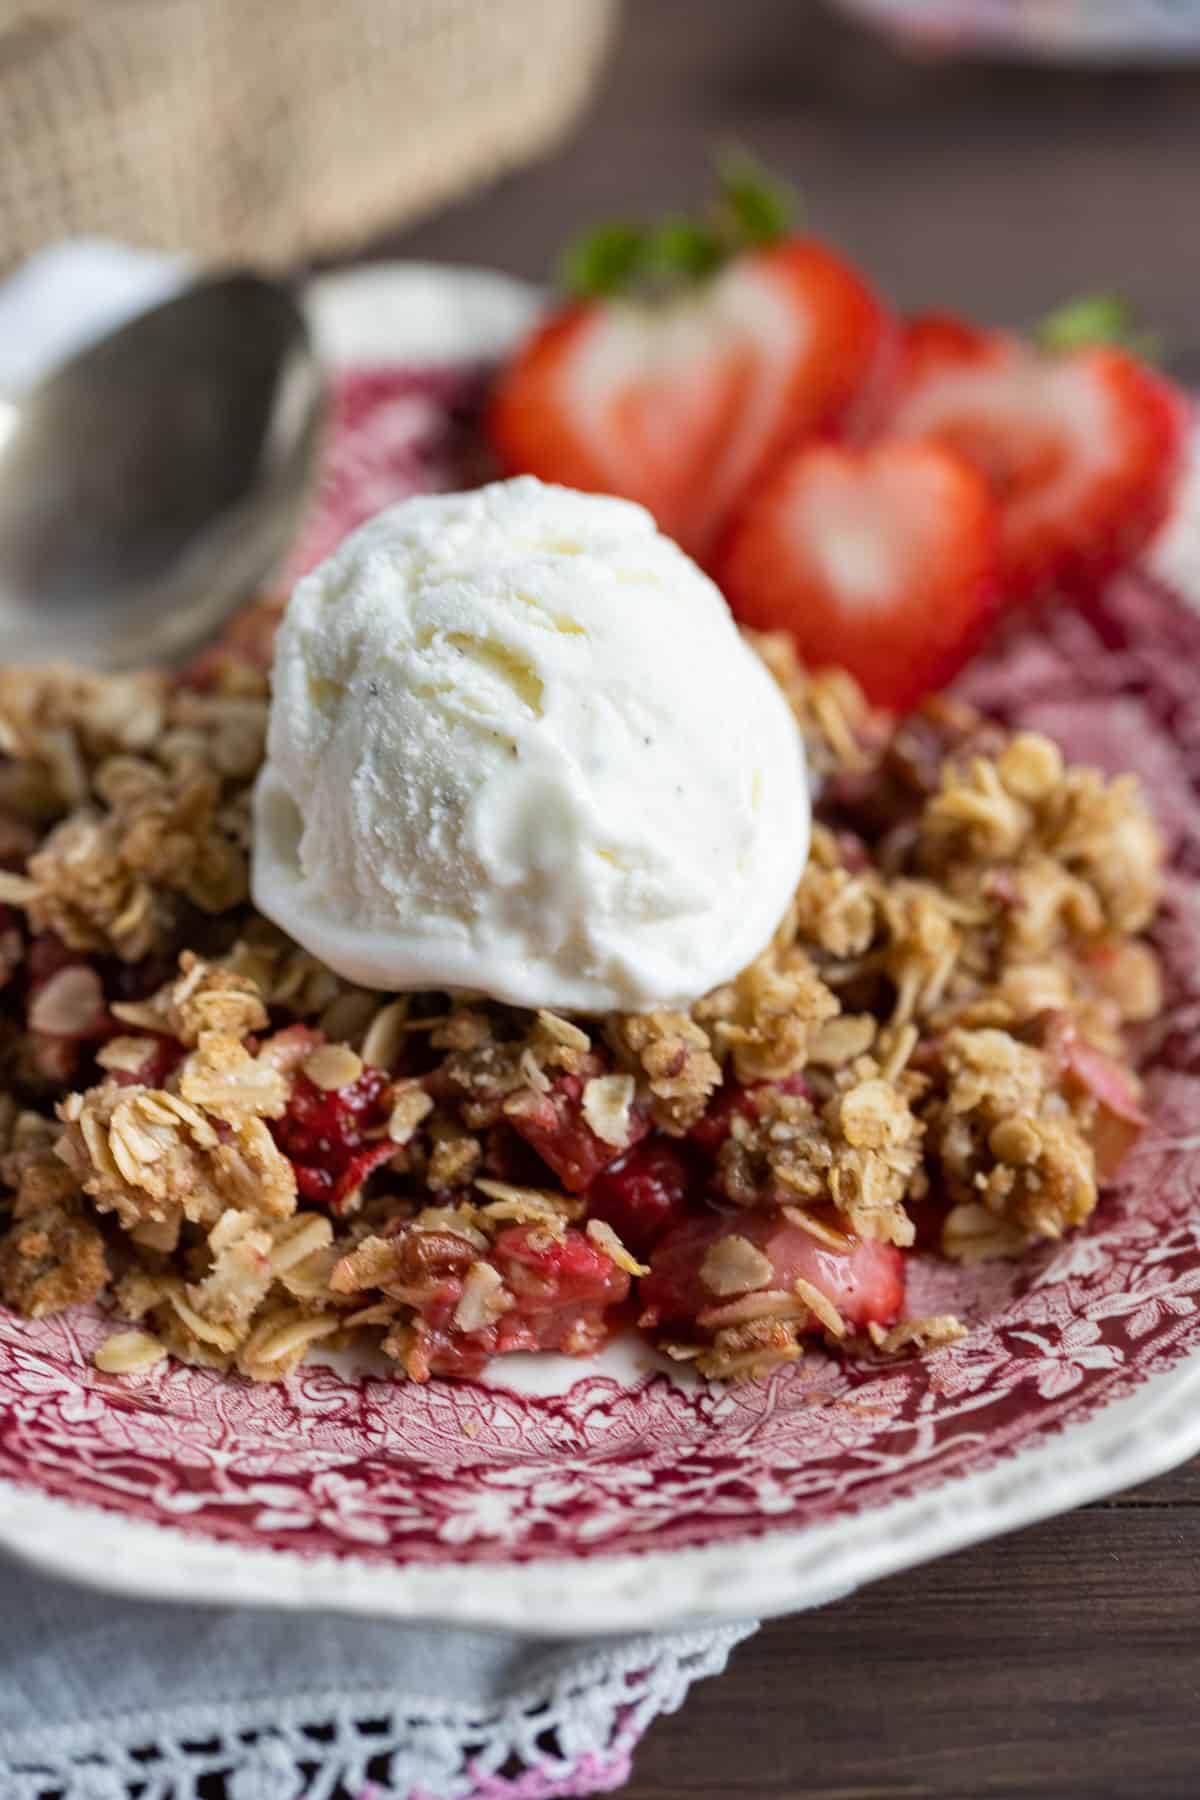 Strawberry Rhubarb Crisp on a plate topped with vanilla ice cream and sliced strawberries on the side.